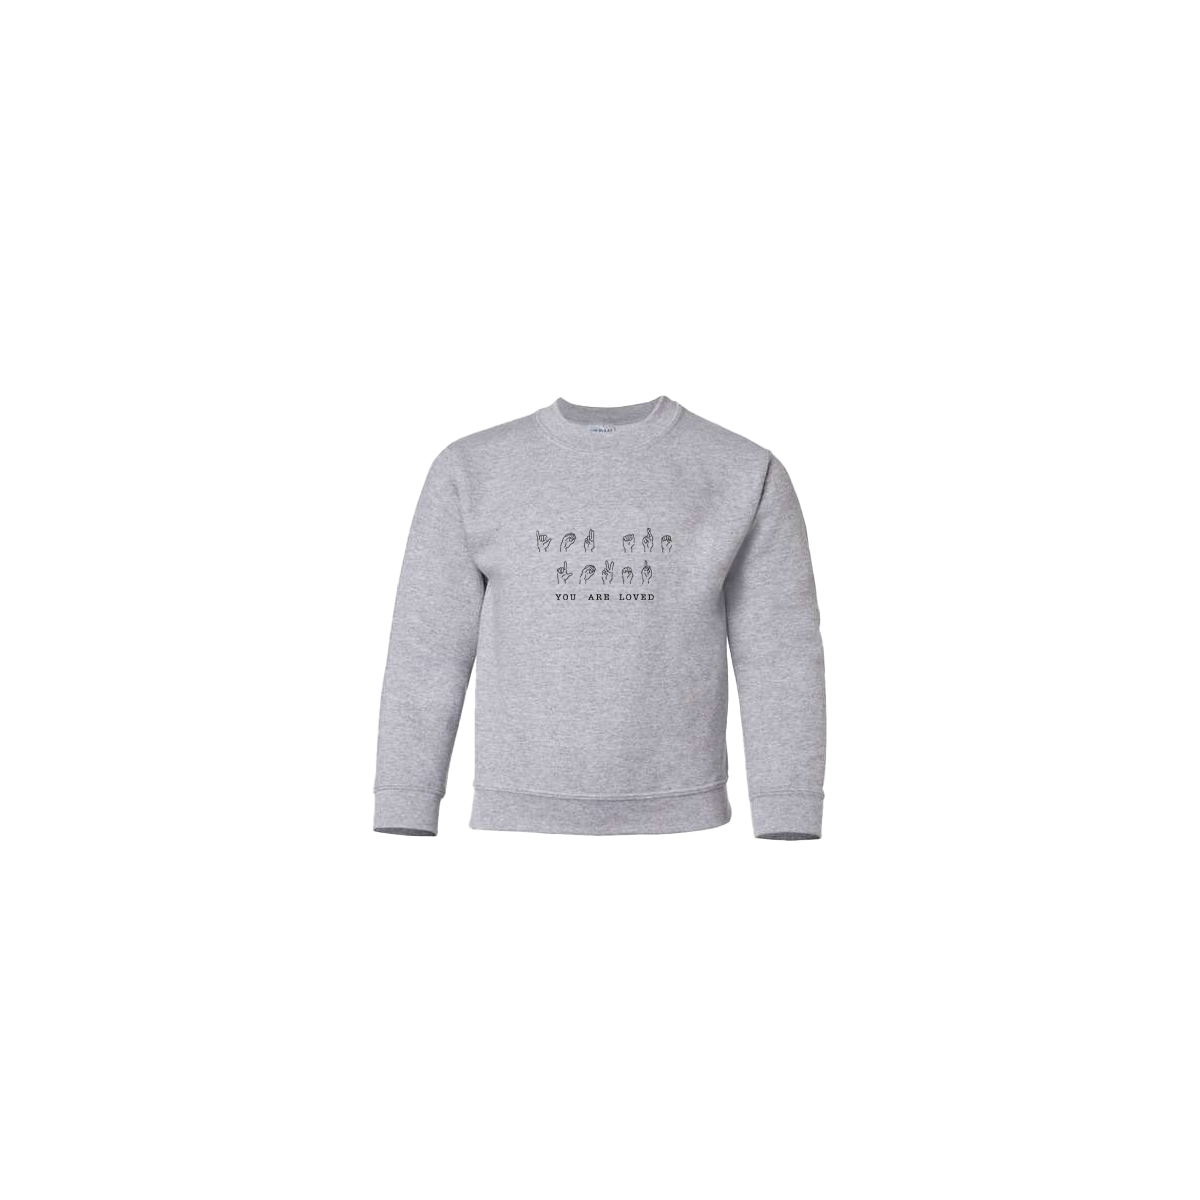 You Are Loved Sign Language Embroidered Grey Youth Crewneck